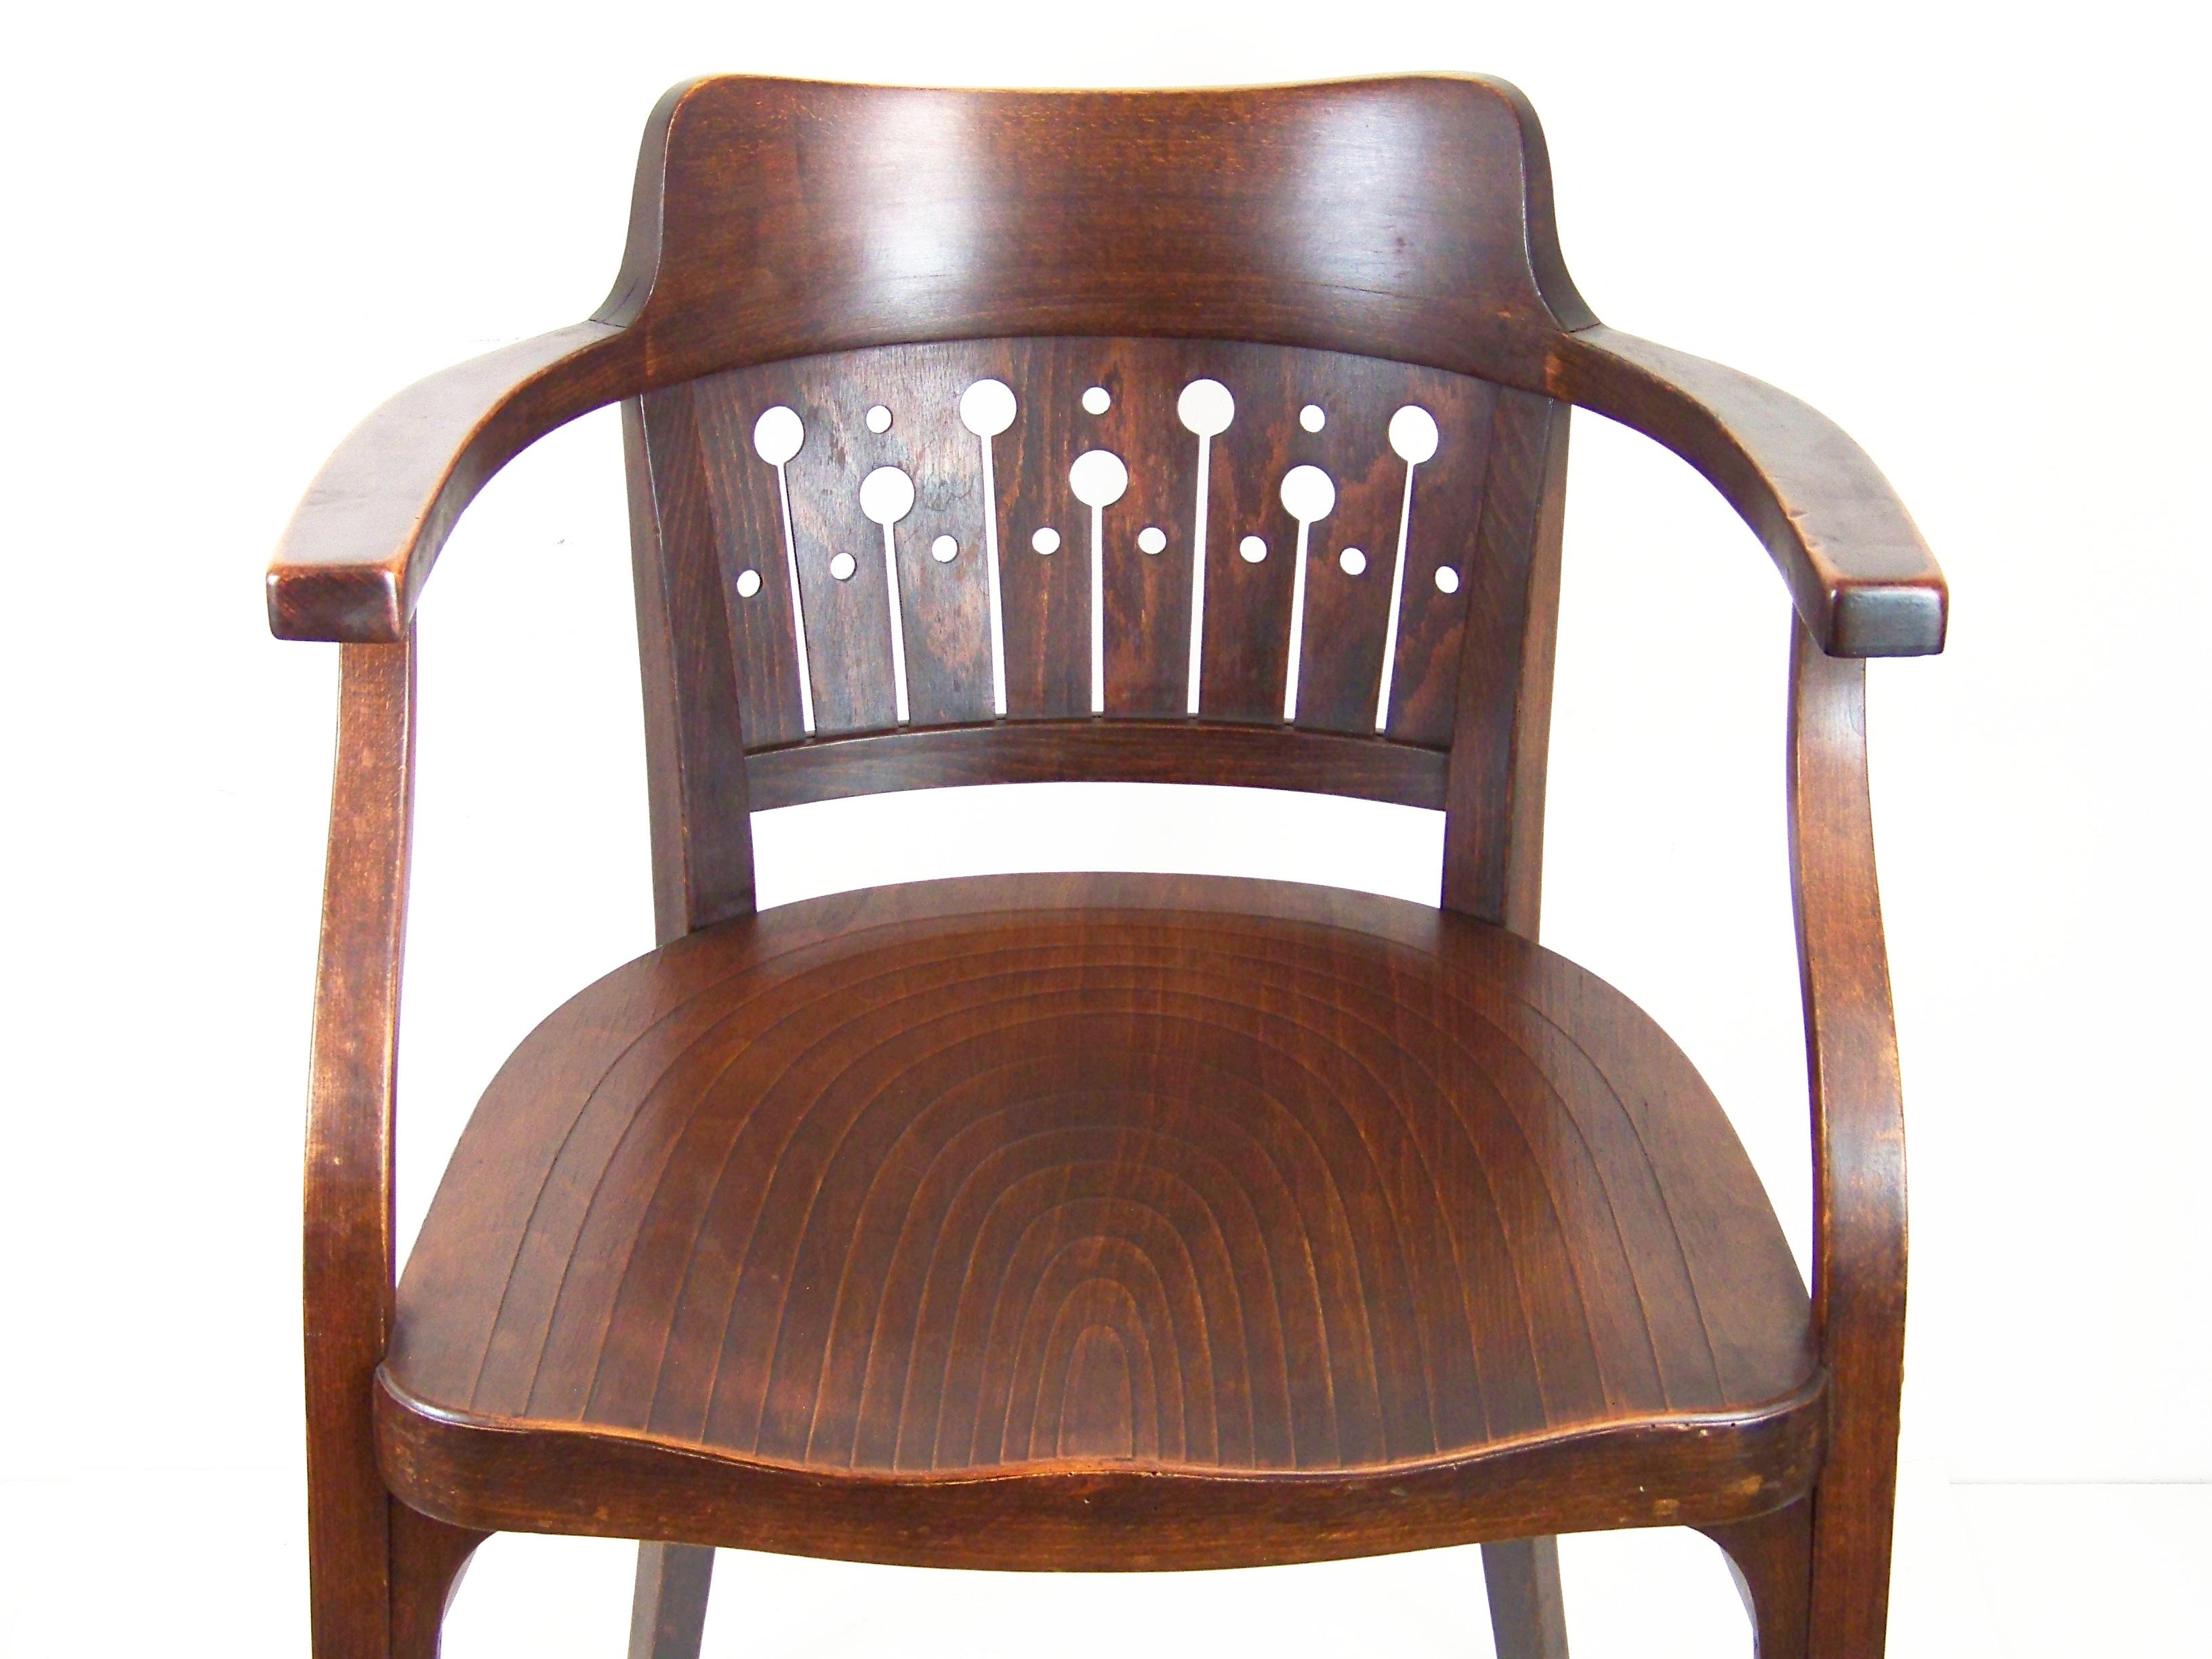 Designed by Otto Wagner in year 1905. Original state with a pleasant patine of age, perfectly cleaned and re-polished. Small traces of the already inactive worm infestation treated with injection of a chemical preparation. Marked with label THONET.